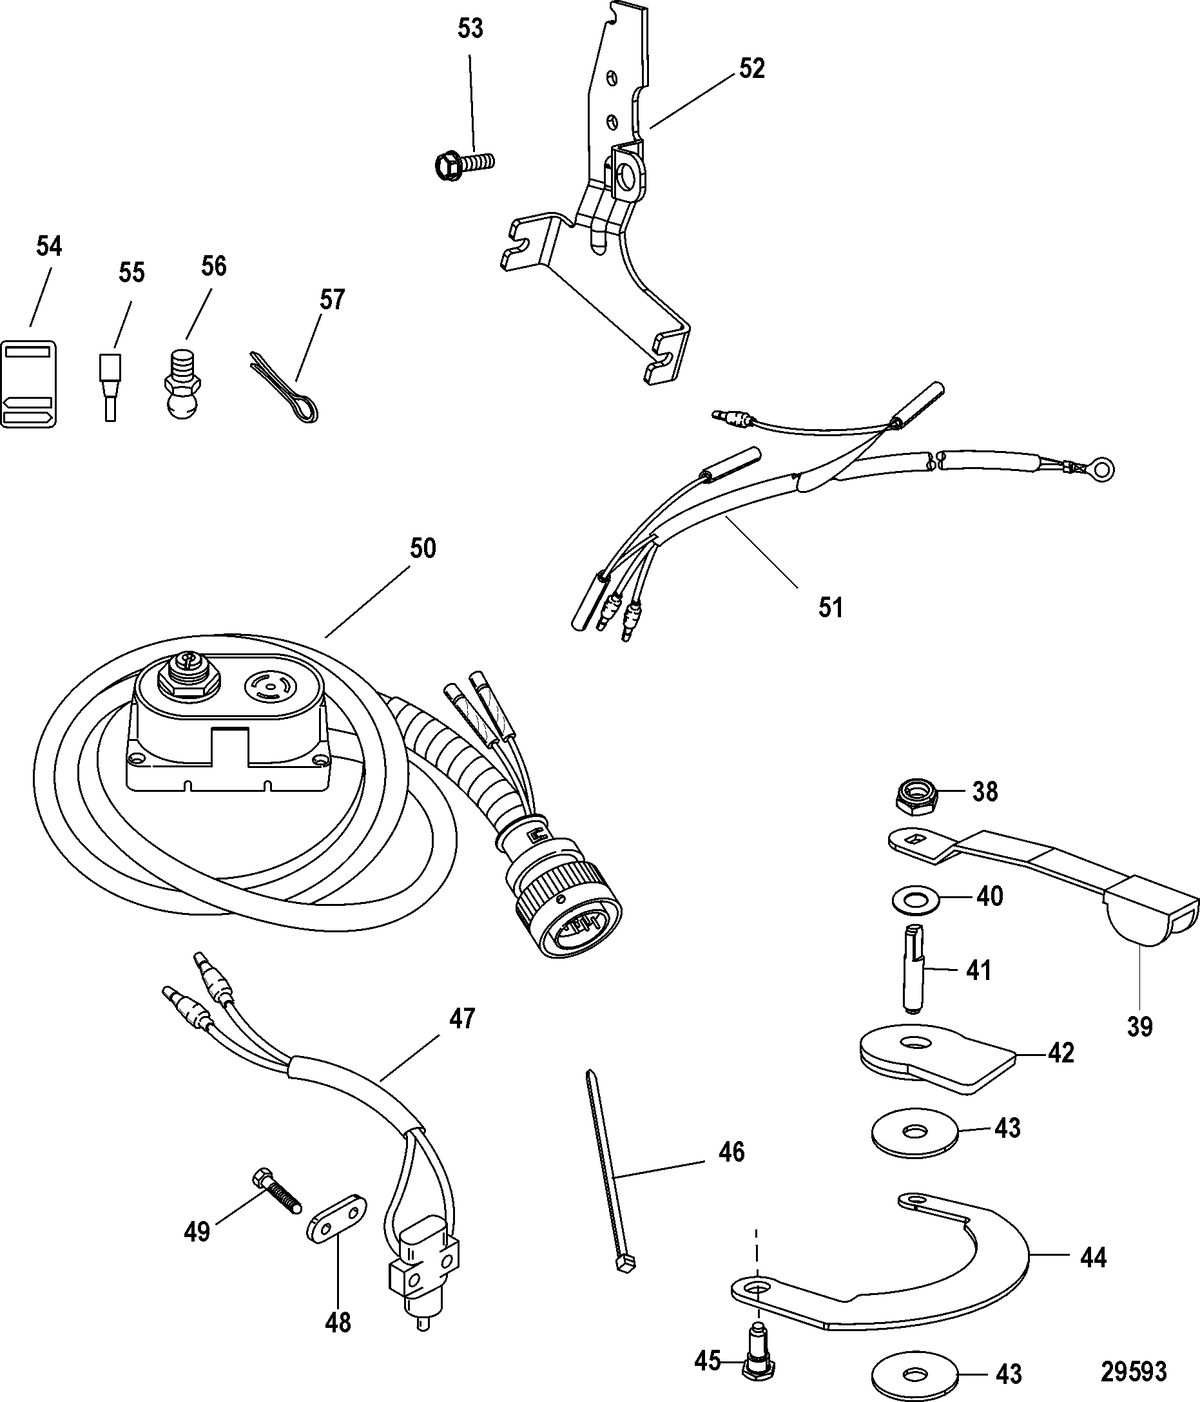 ACCESSORIES STEERING SYSTEMS AND COMPONENTS Tiller Handle Kit Components(821455A13 /A17)